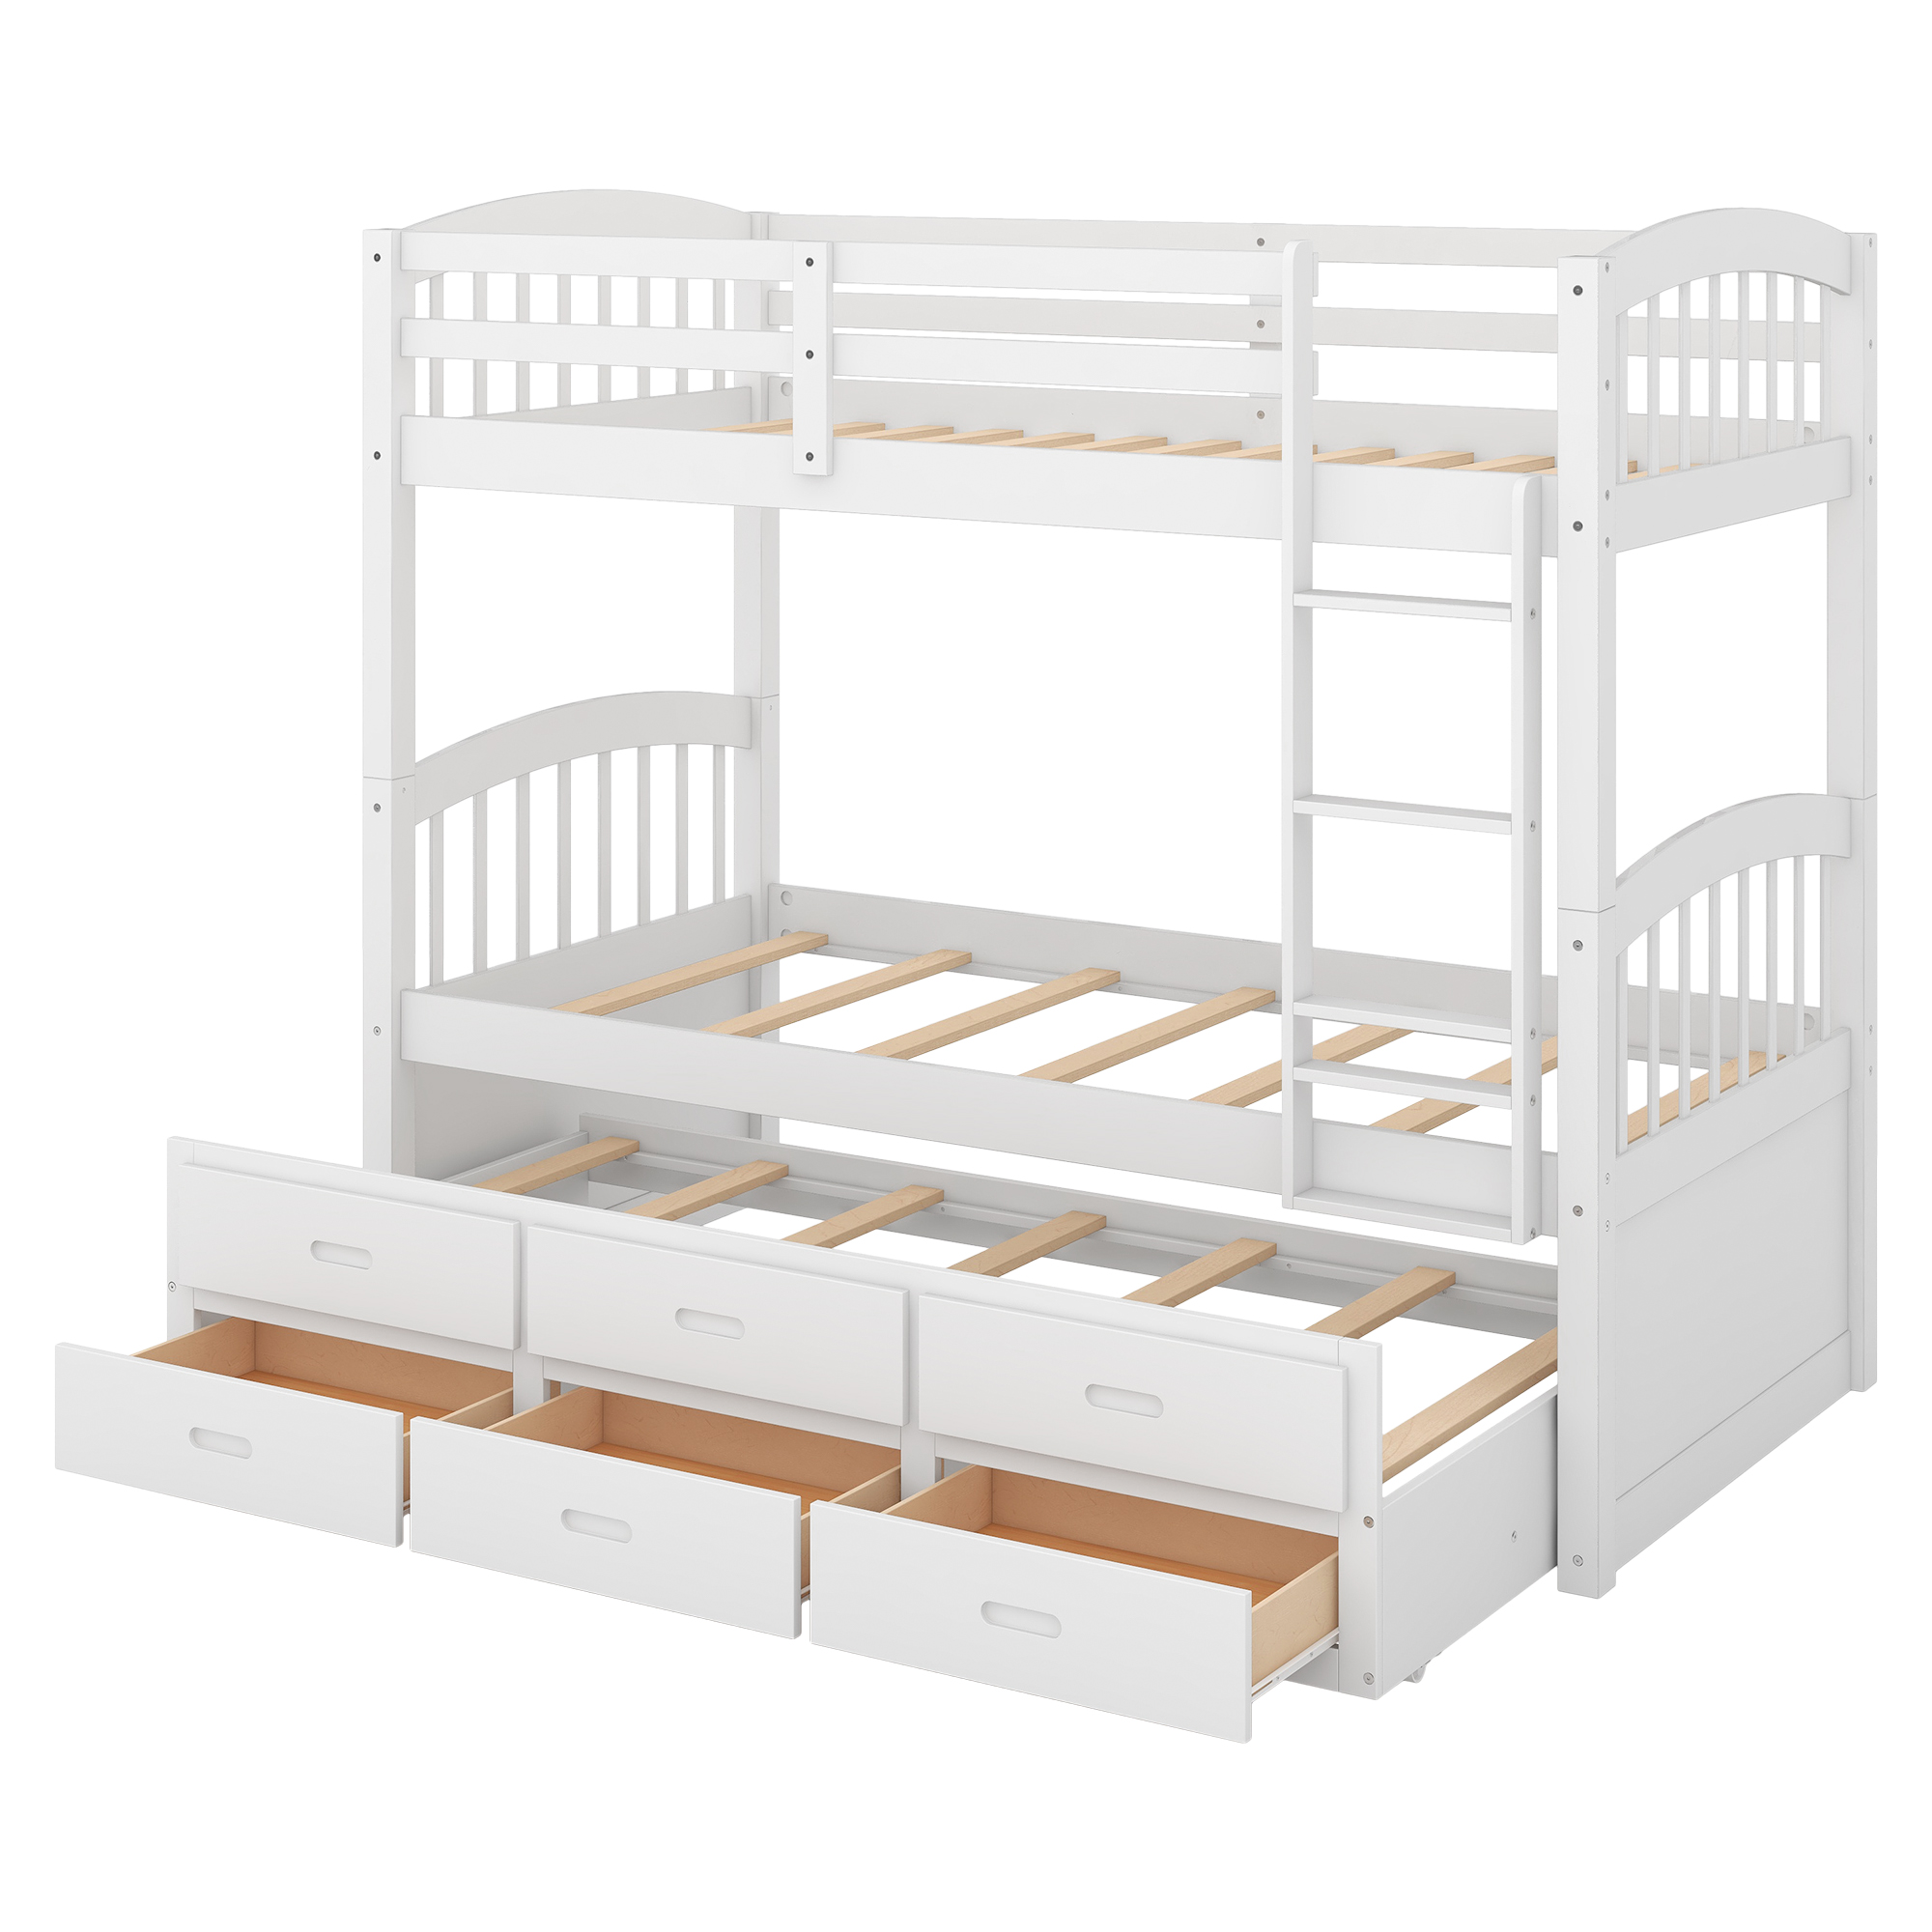 Euroco Twin Over Twin Wood Bunk Bed with Trundle and Drawers, White - image 4 of 13